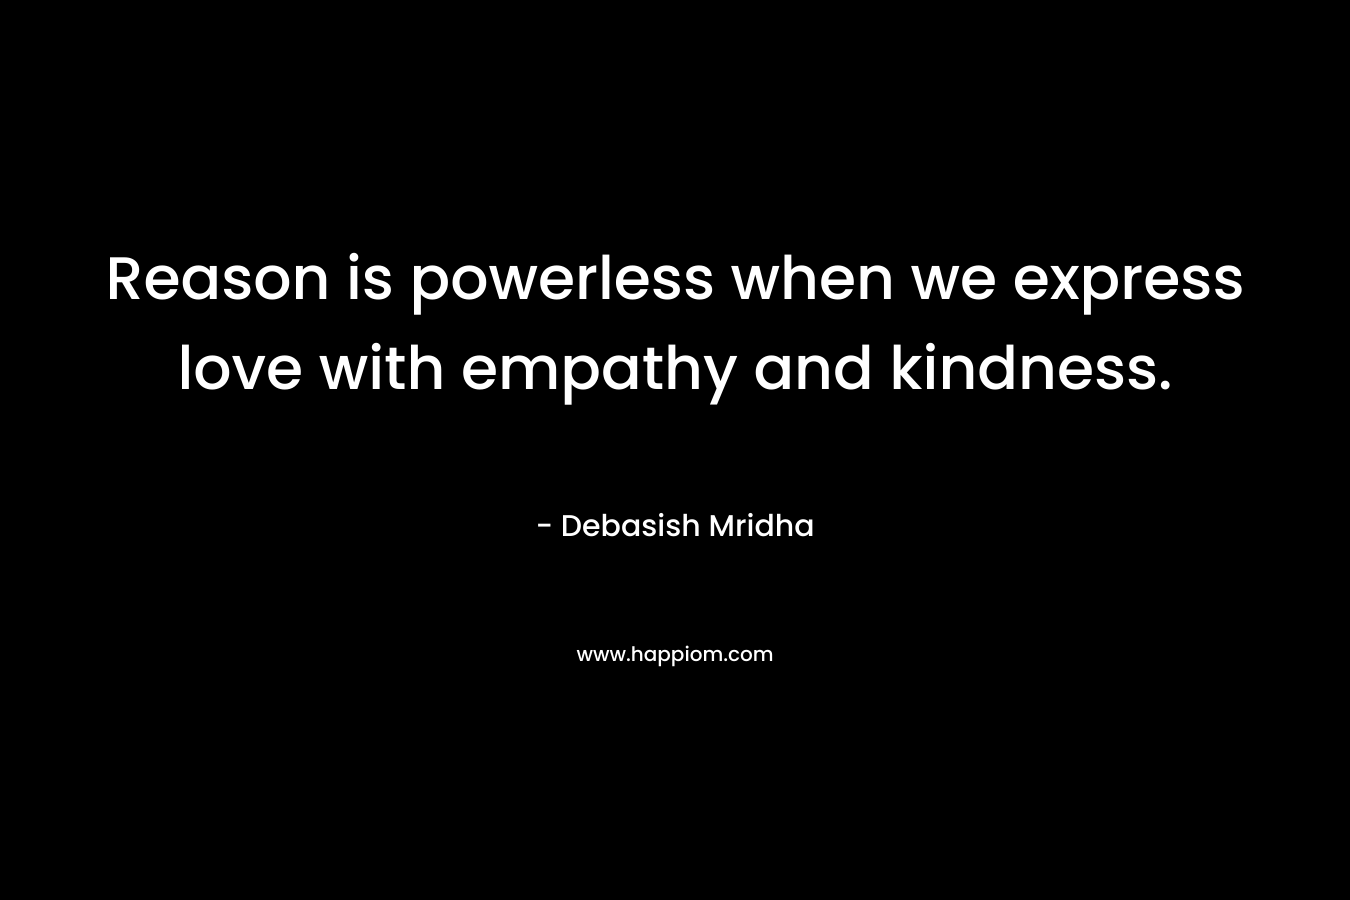 Reason is powerless when we express love with empathy and kindness.